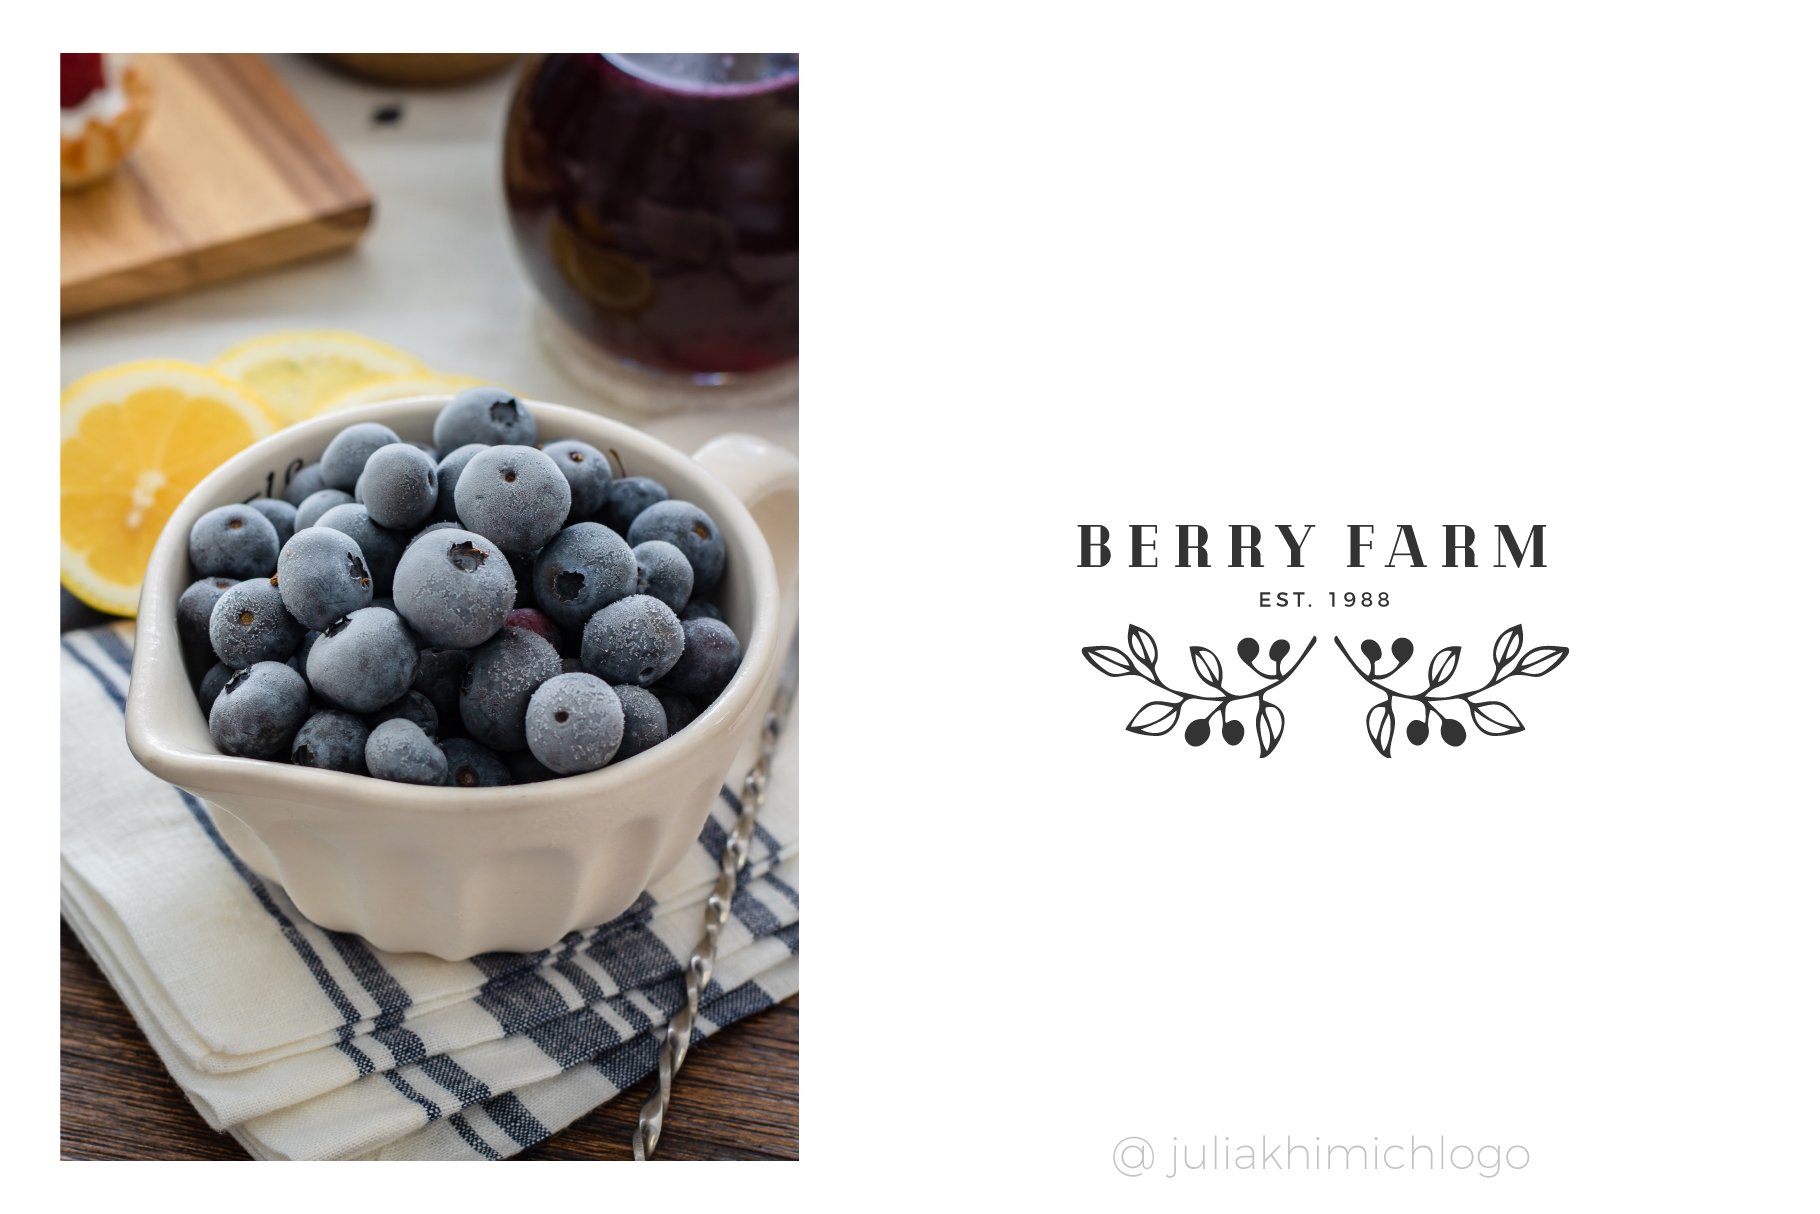 This logo conveys all the sweetness of blueberries.